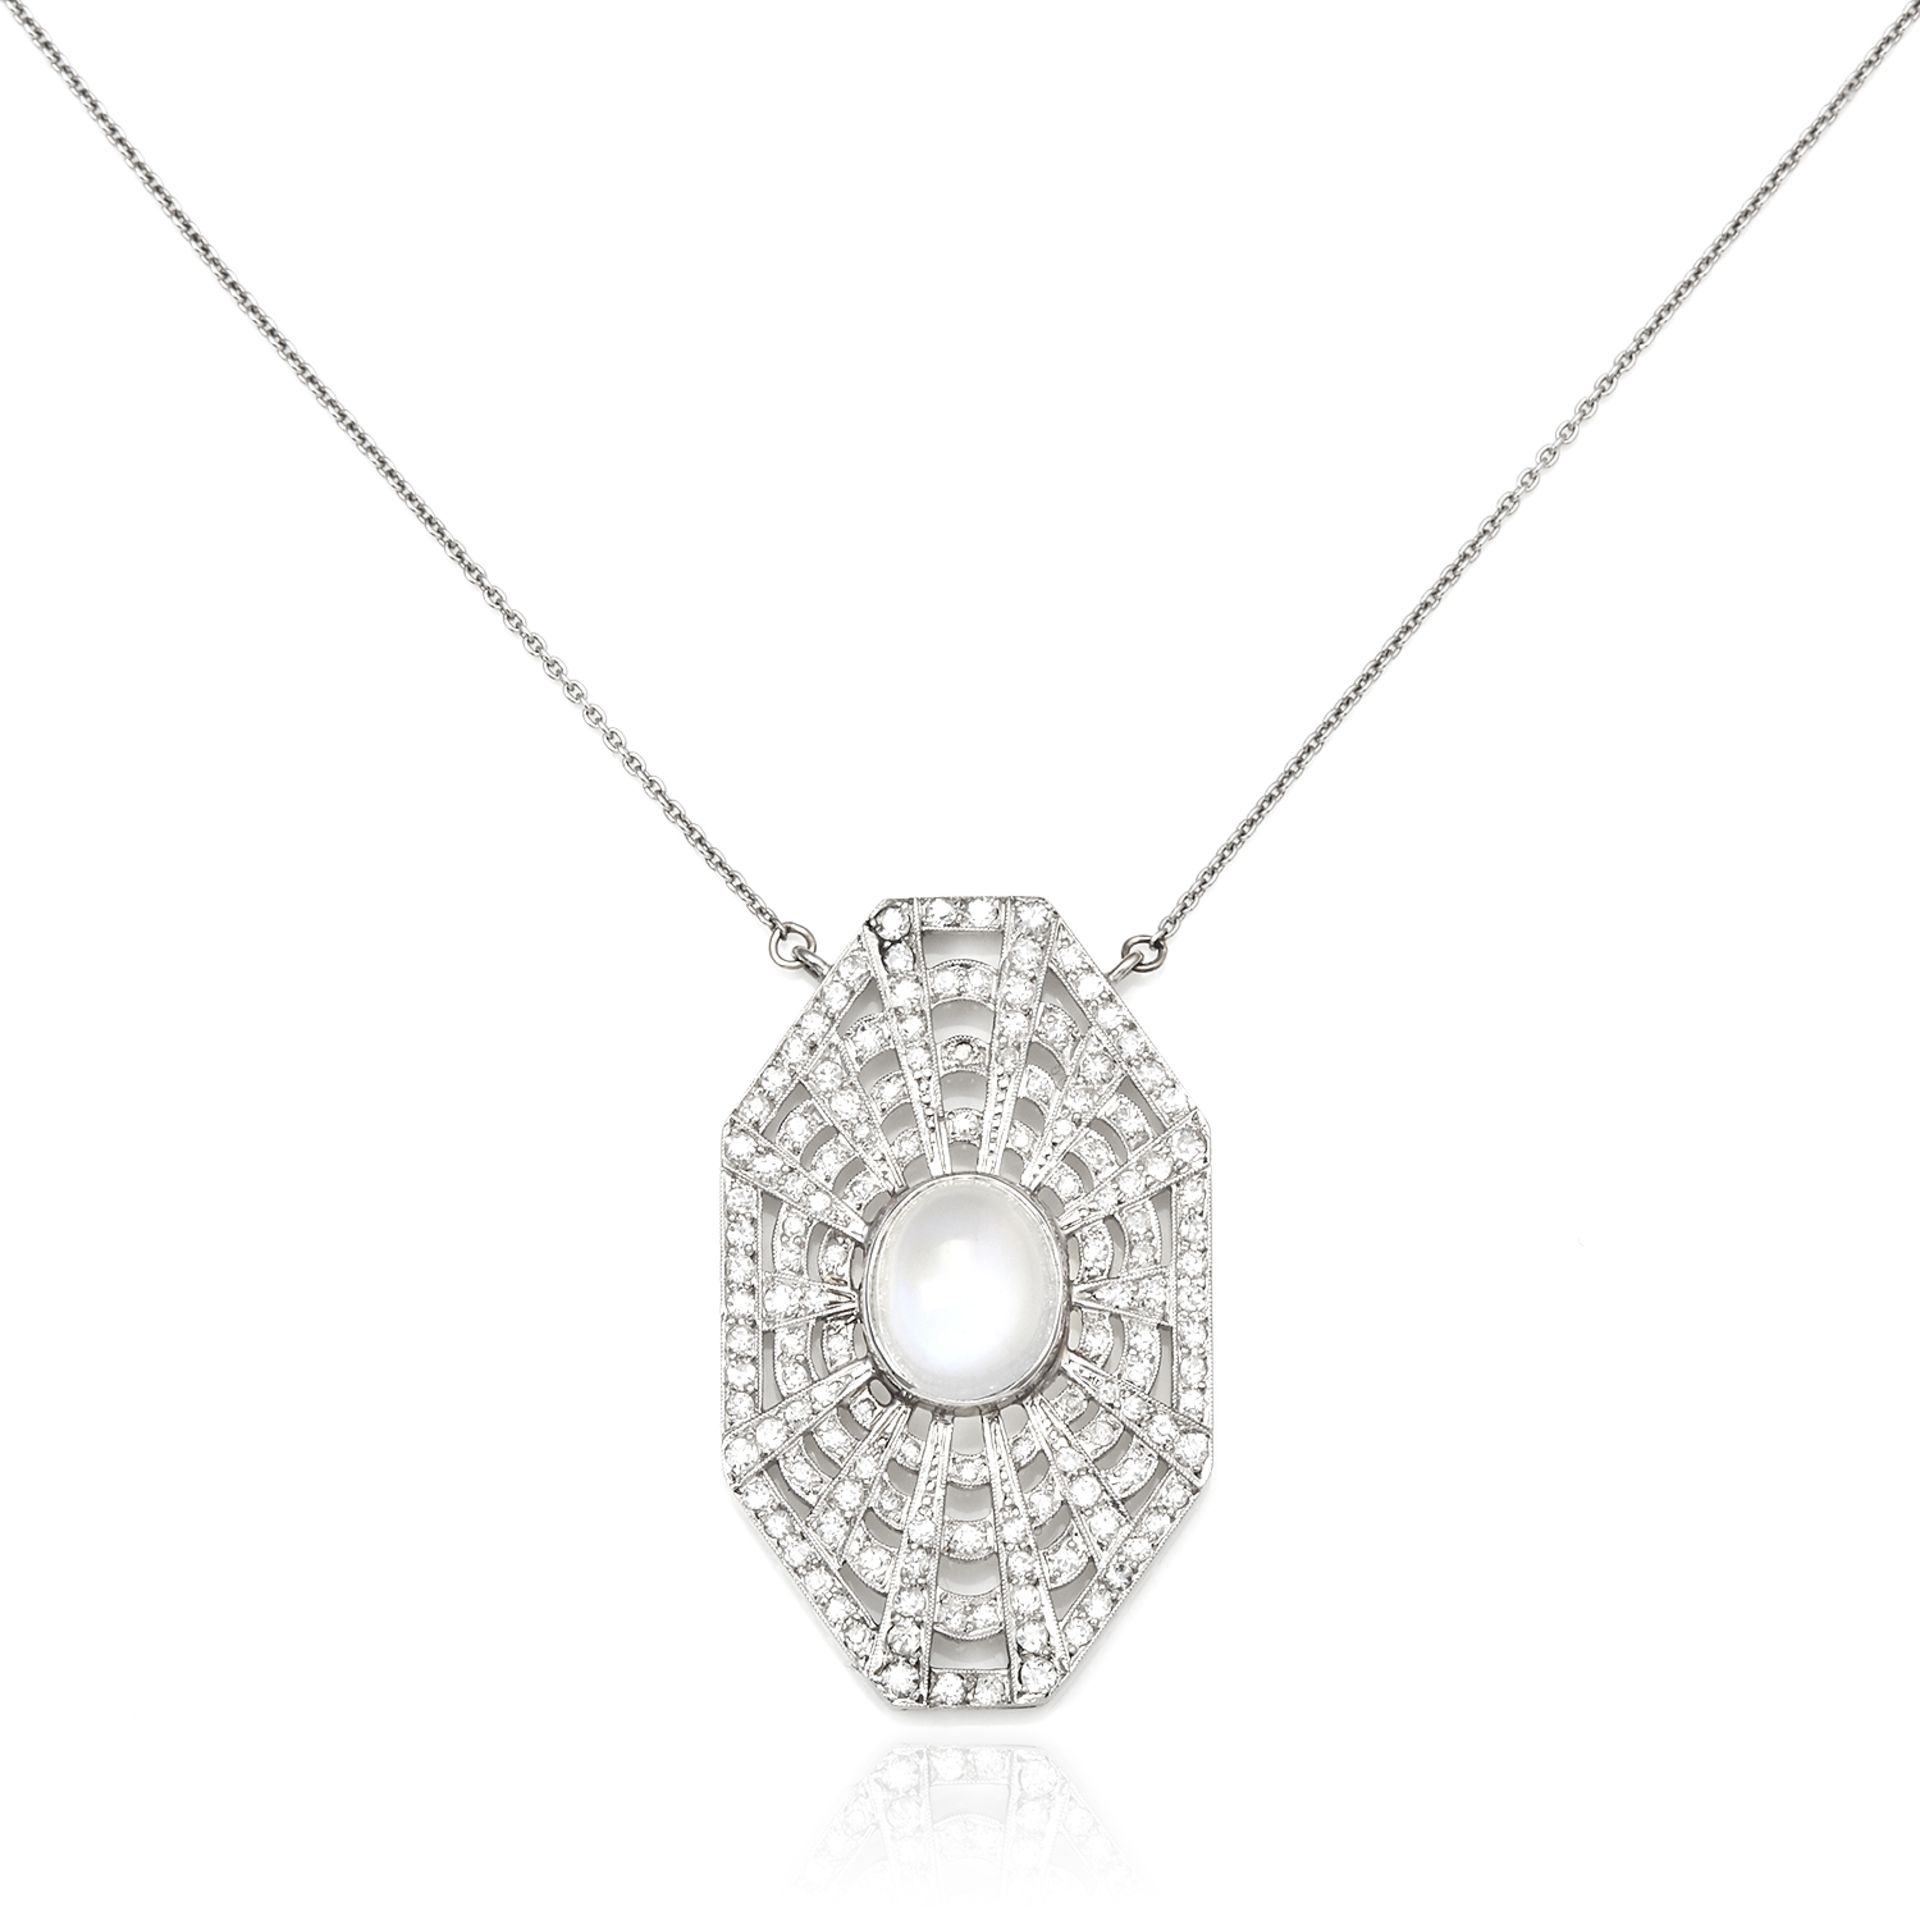 AN ART DECO MOONSTONE AND DIAMOND PENDANT in platinum, set with a central oval cabochon moonstone,